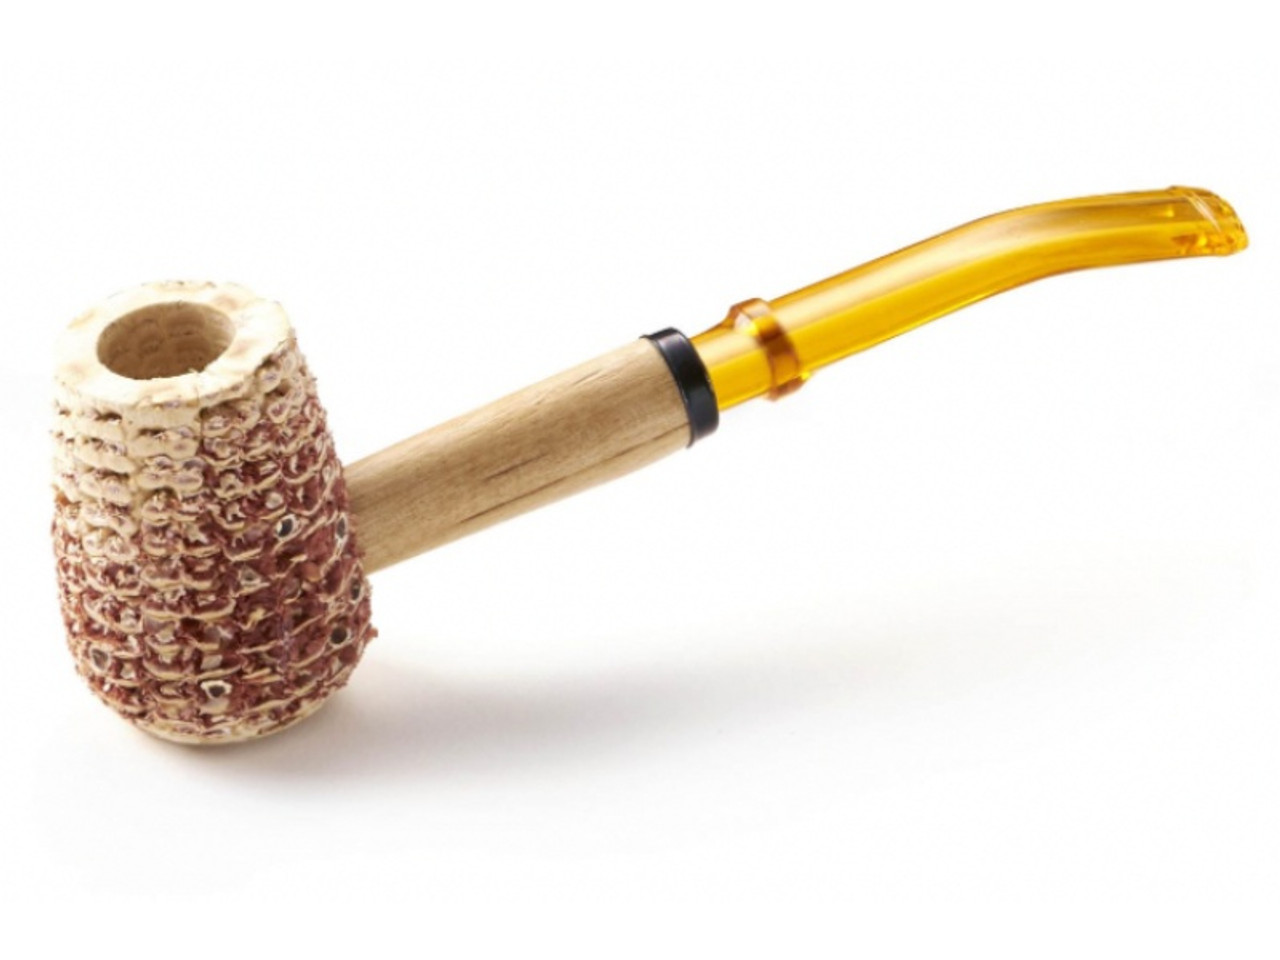 Missouri Meerschaum Volcano Pipes at The Pipe Nook!